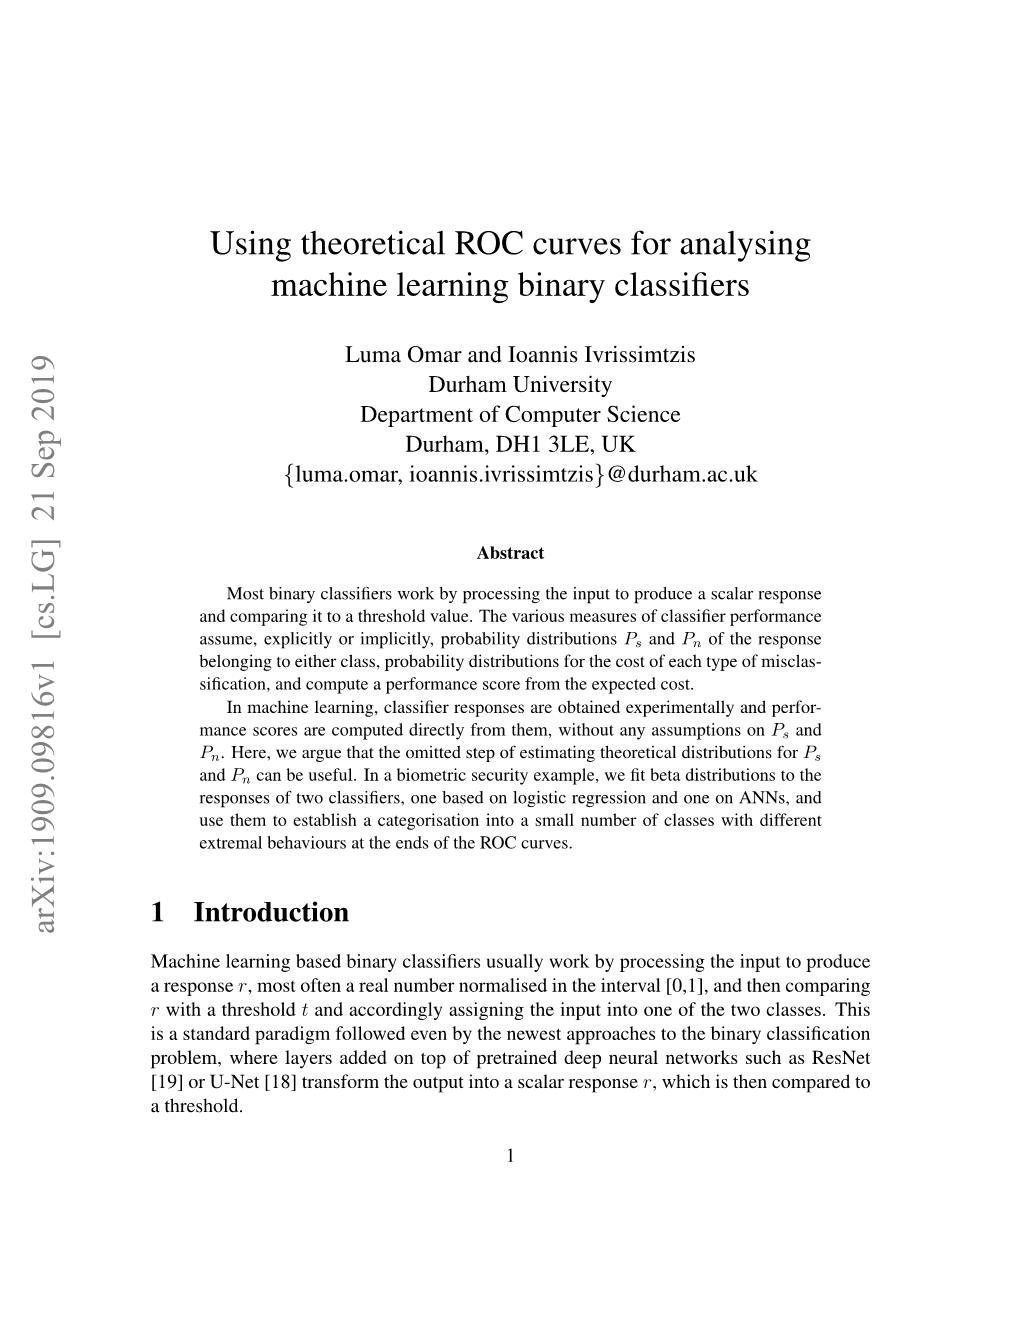 Using Theoretical ROC Curves for Analysing Machine Learning Binary Classiﬁers